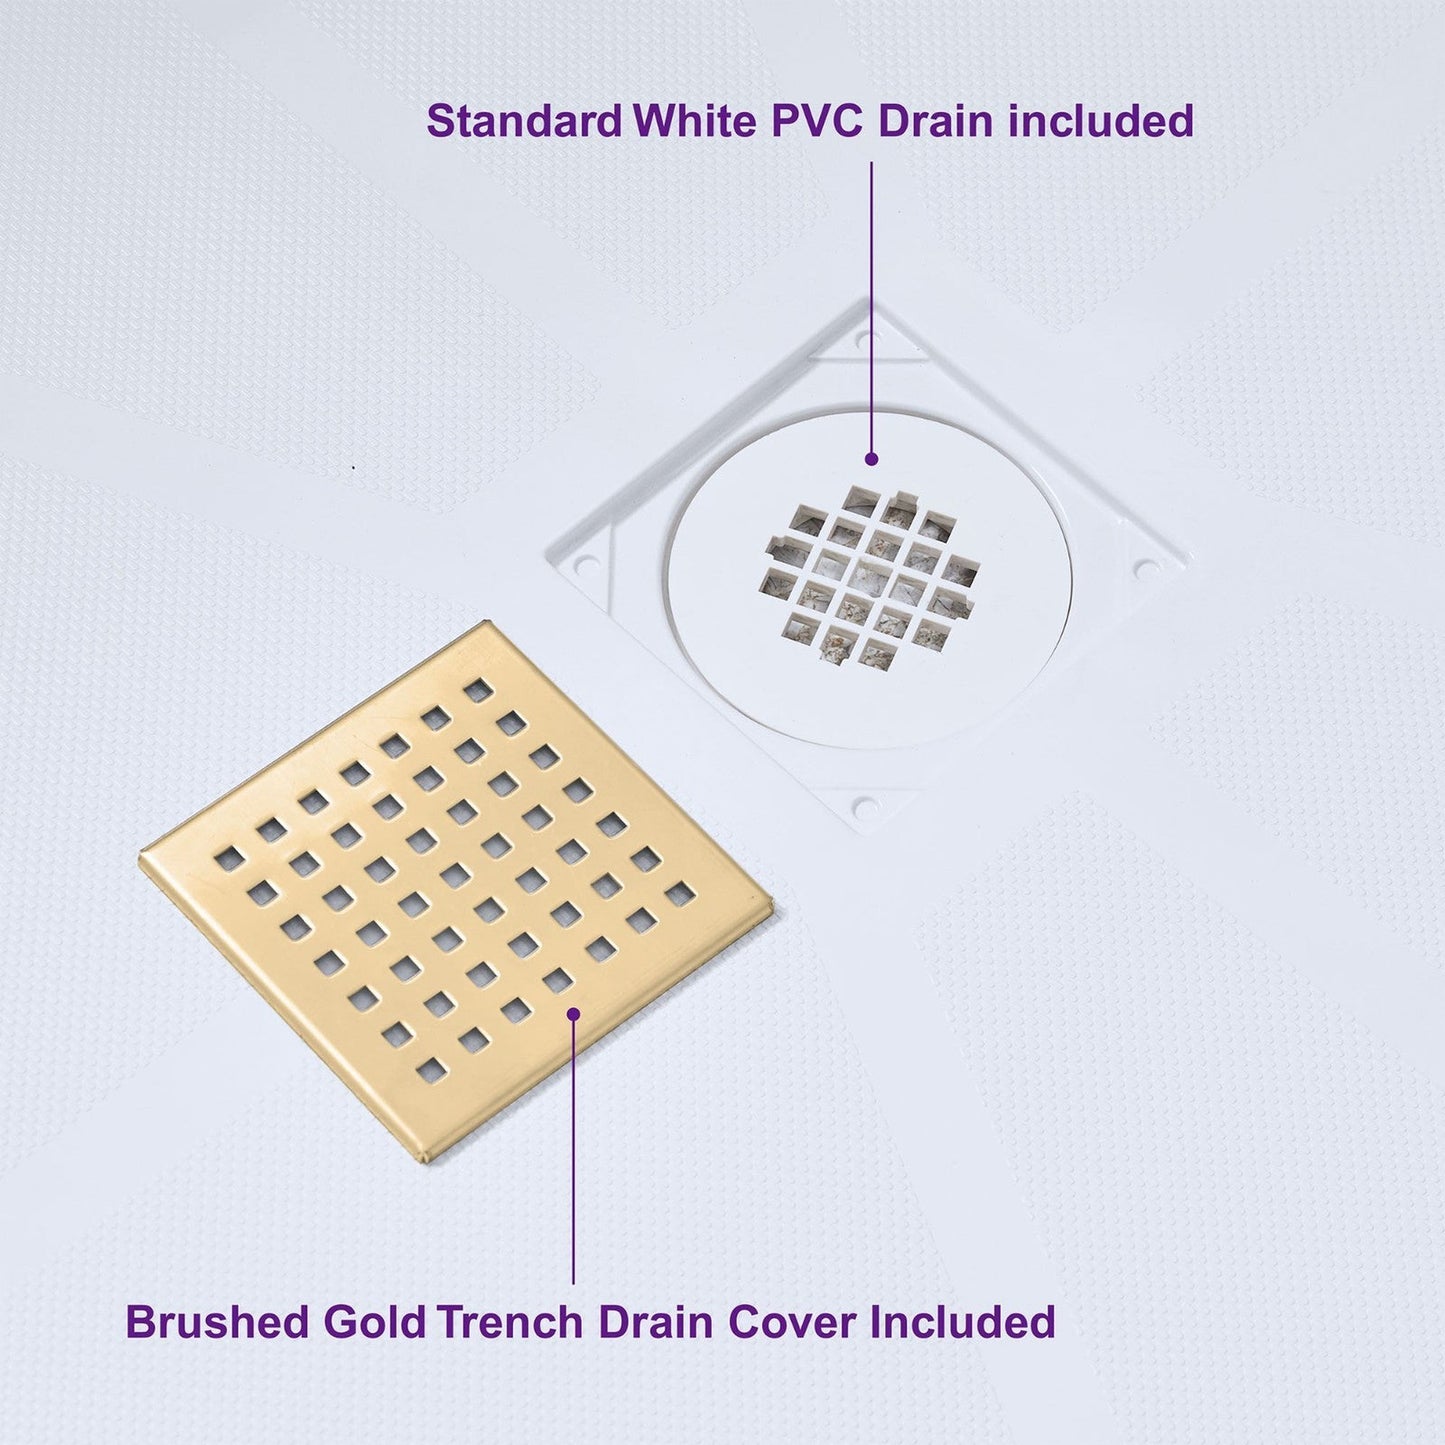 WoodBridge 60" x 32" White Solid Surface Shower Base Center Drain Location With Brushed Gold Trench Drain Cover